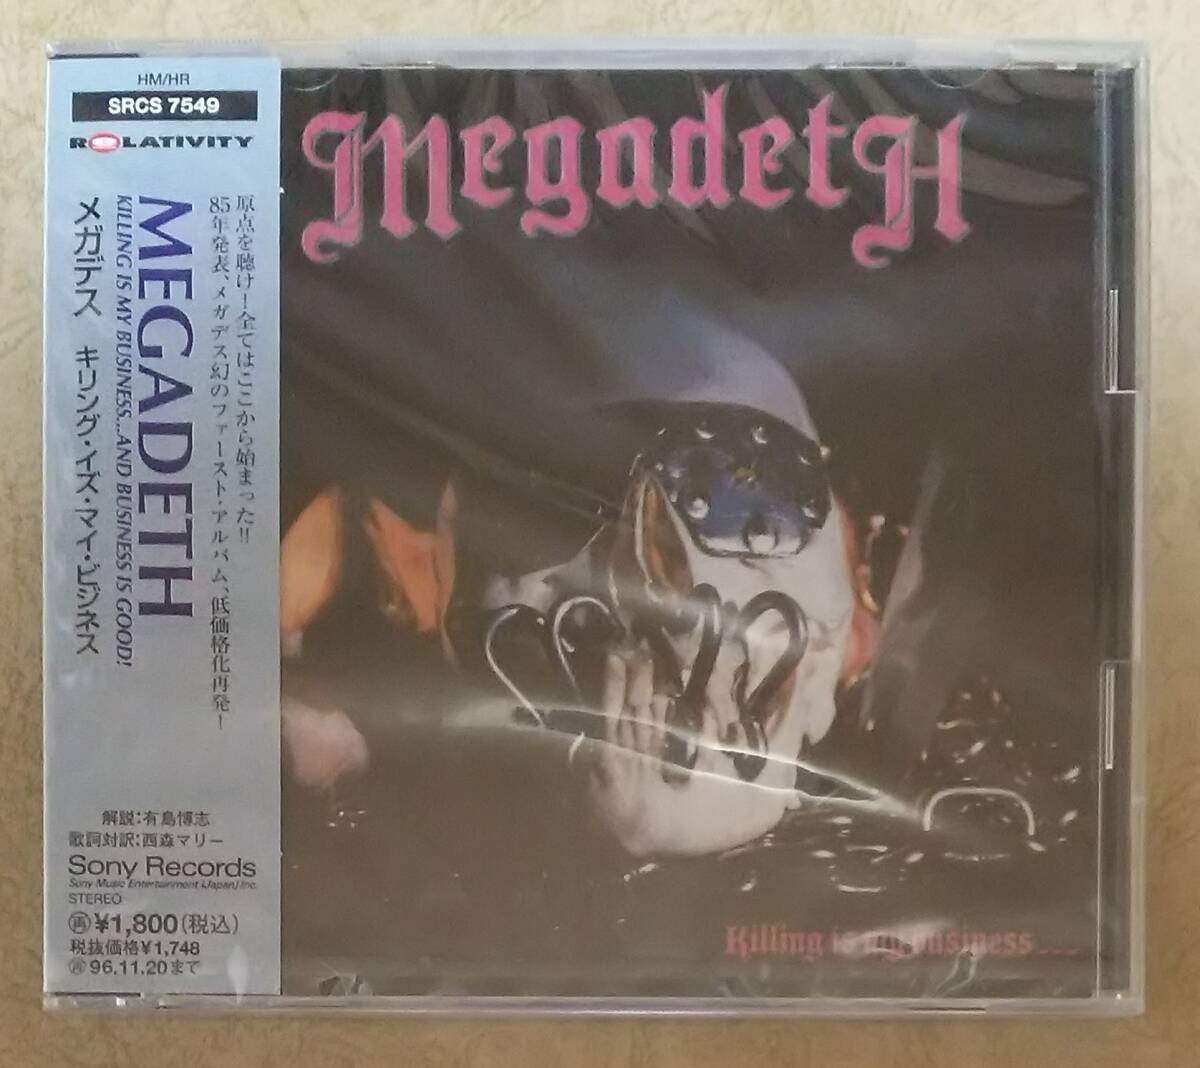 [HM/HR] * unopened new goods mega tes(MEGADETH) /ki ring *iz* my * business (KILLING IS MY BUSINESS) with belt old standard record /1994 year repeated departure record 